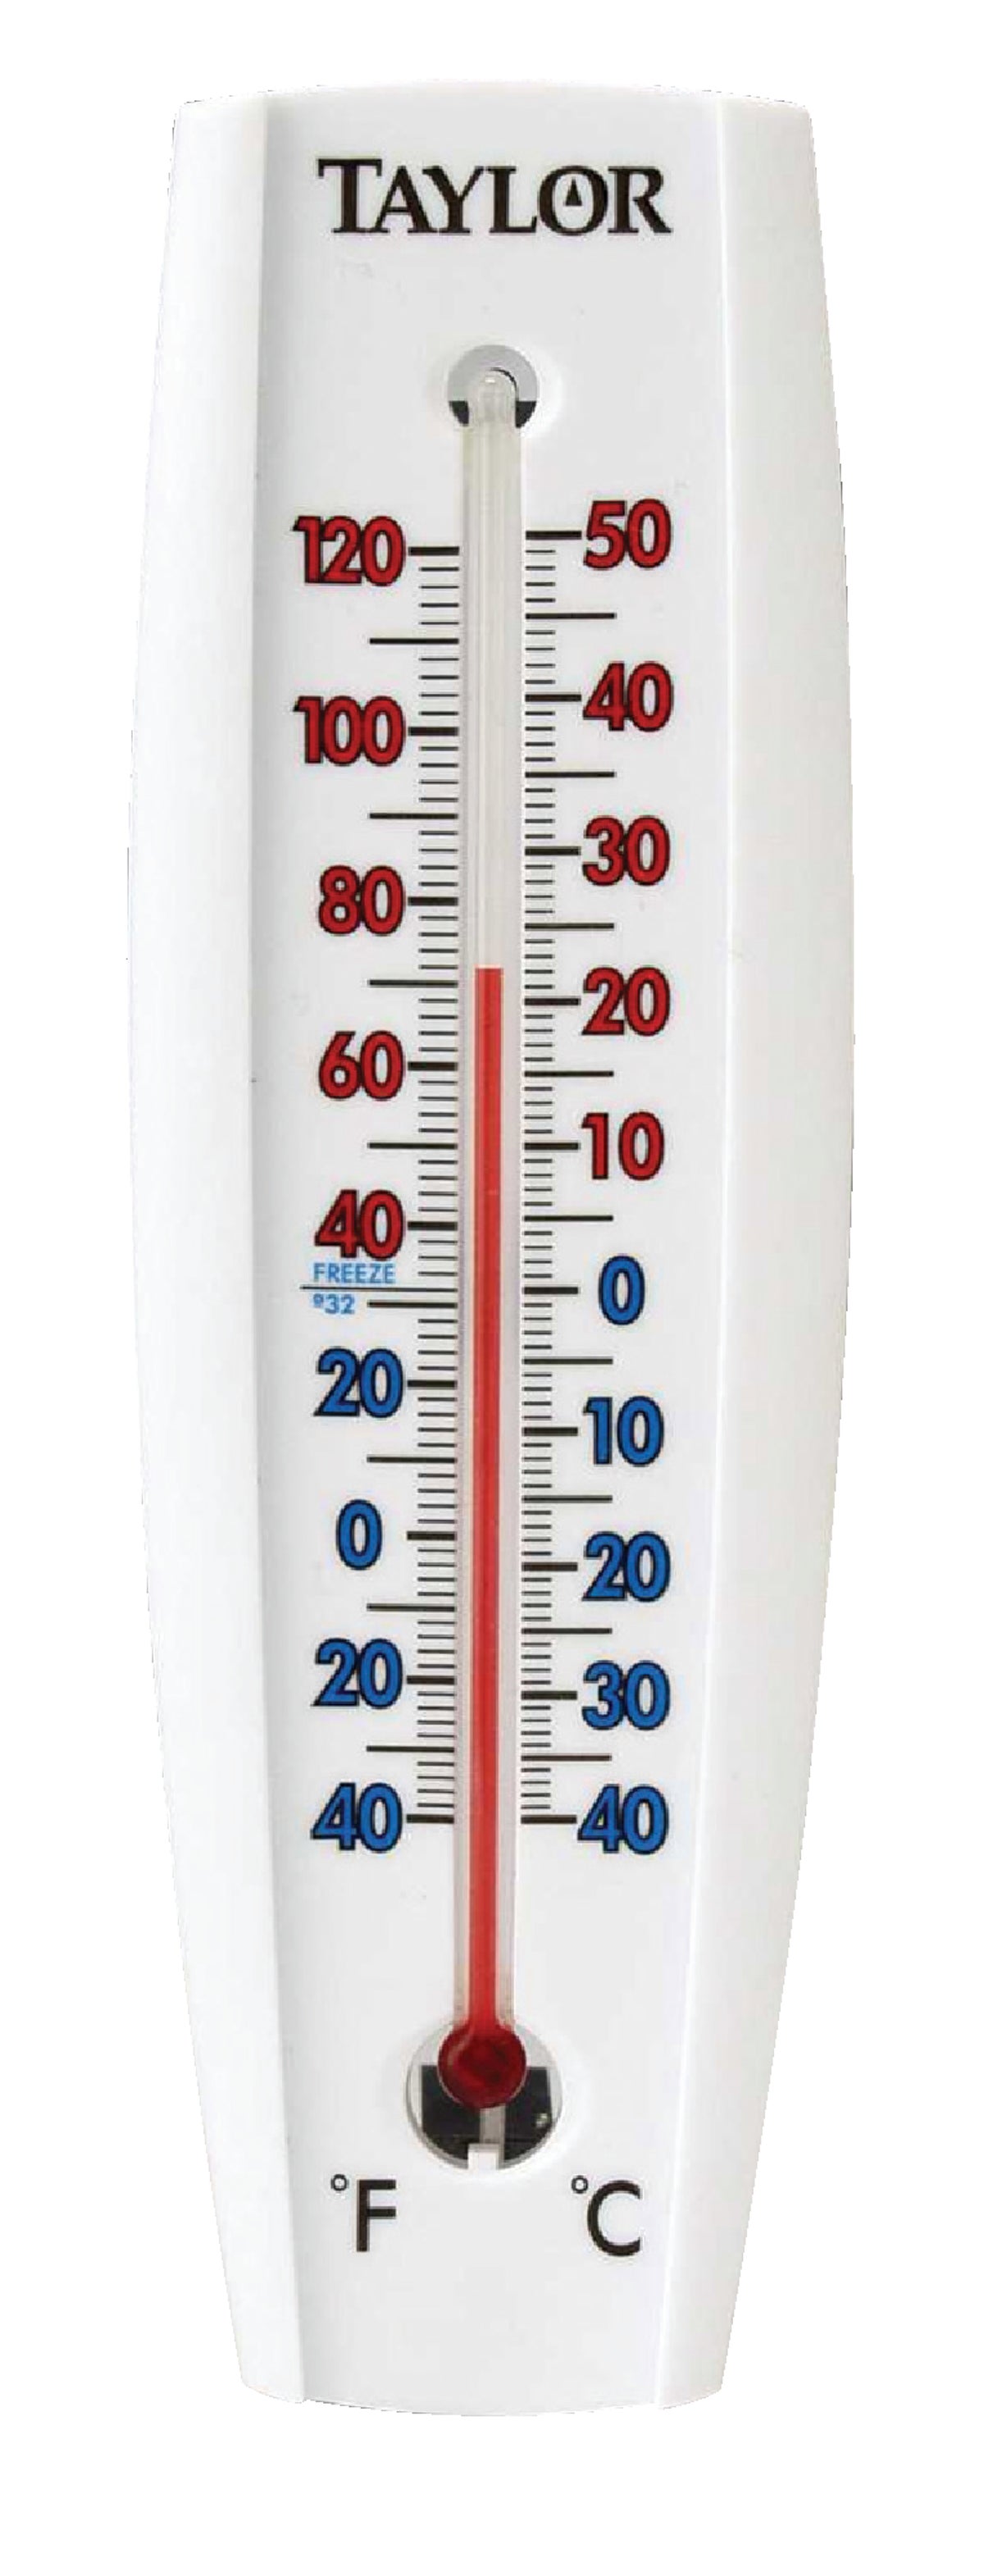 Taylor 5321N 3 1/2 Dial Stick-On Outdoor Window Thermometer